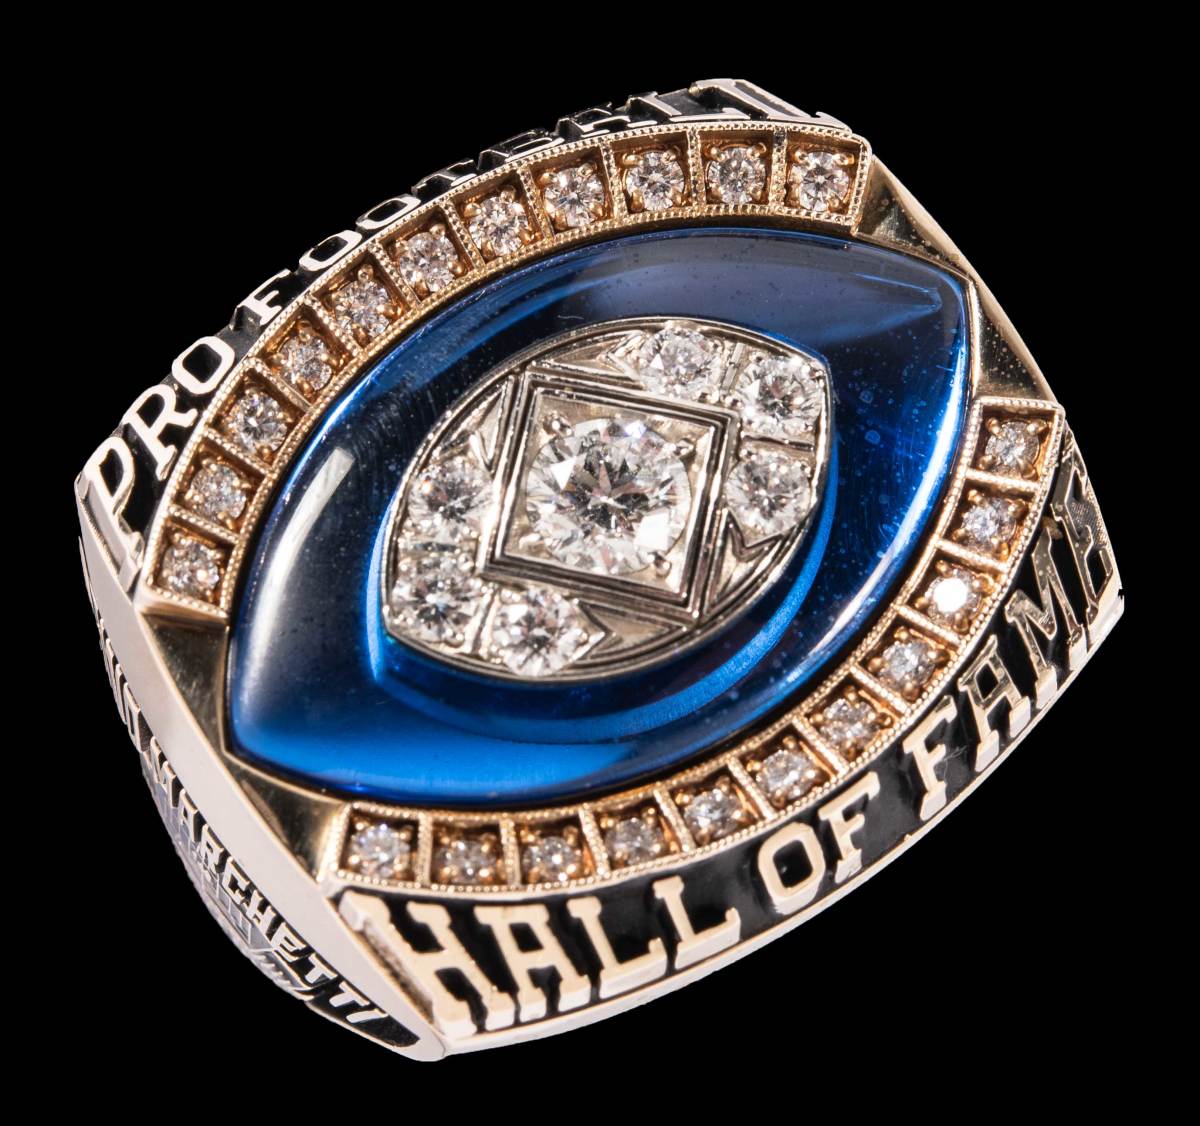 Gino Marchetti Pro Football Hall of Fame Induction ring.